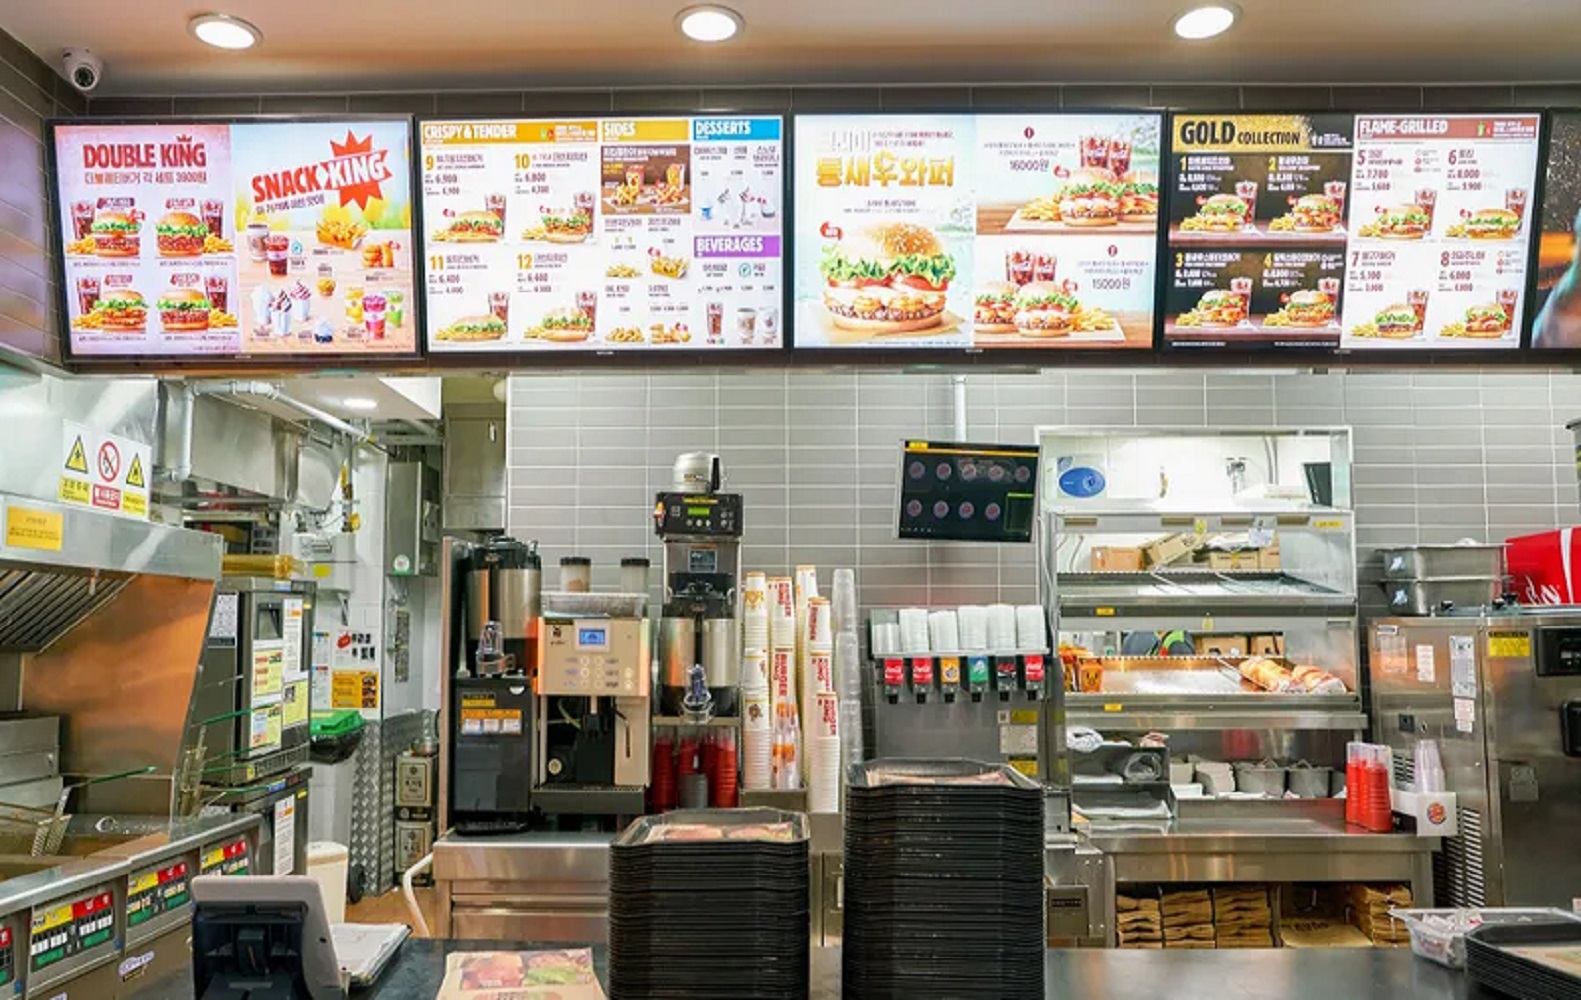 Fast Food and Quick Service Restaurant Market 27